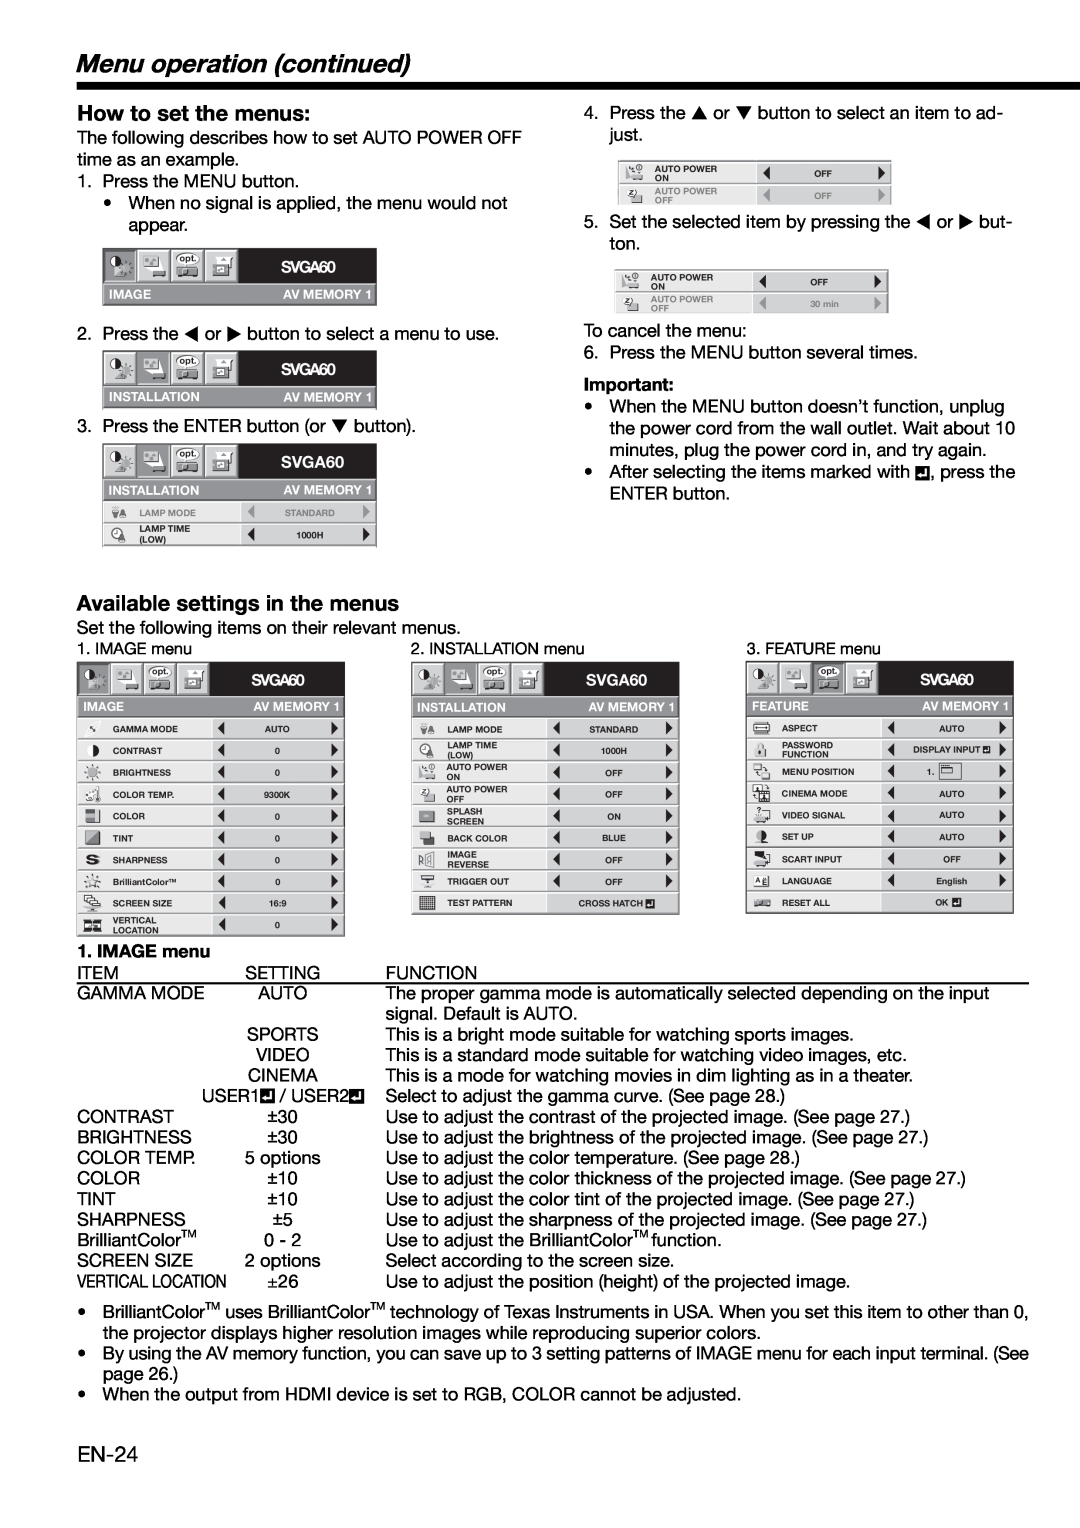 Mitsubishi HC1100 user manual Menu operation continued, How to set the menus, Available settings in the menus, Press the or 